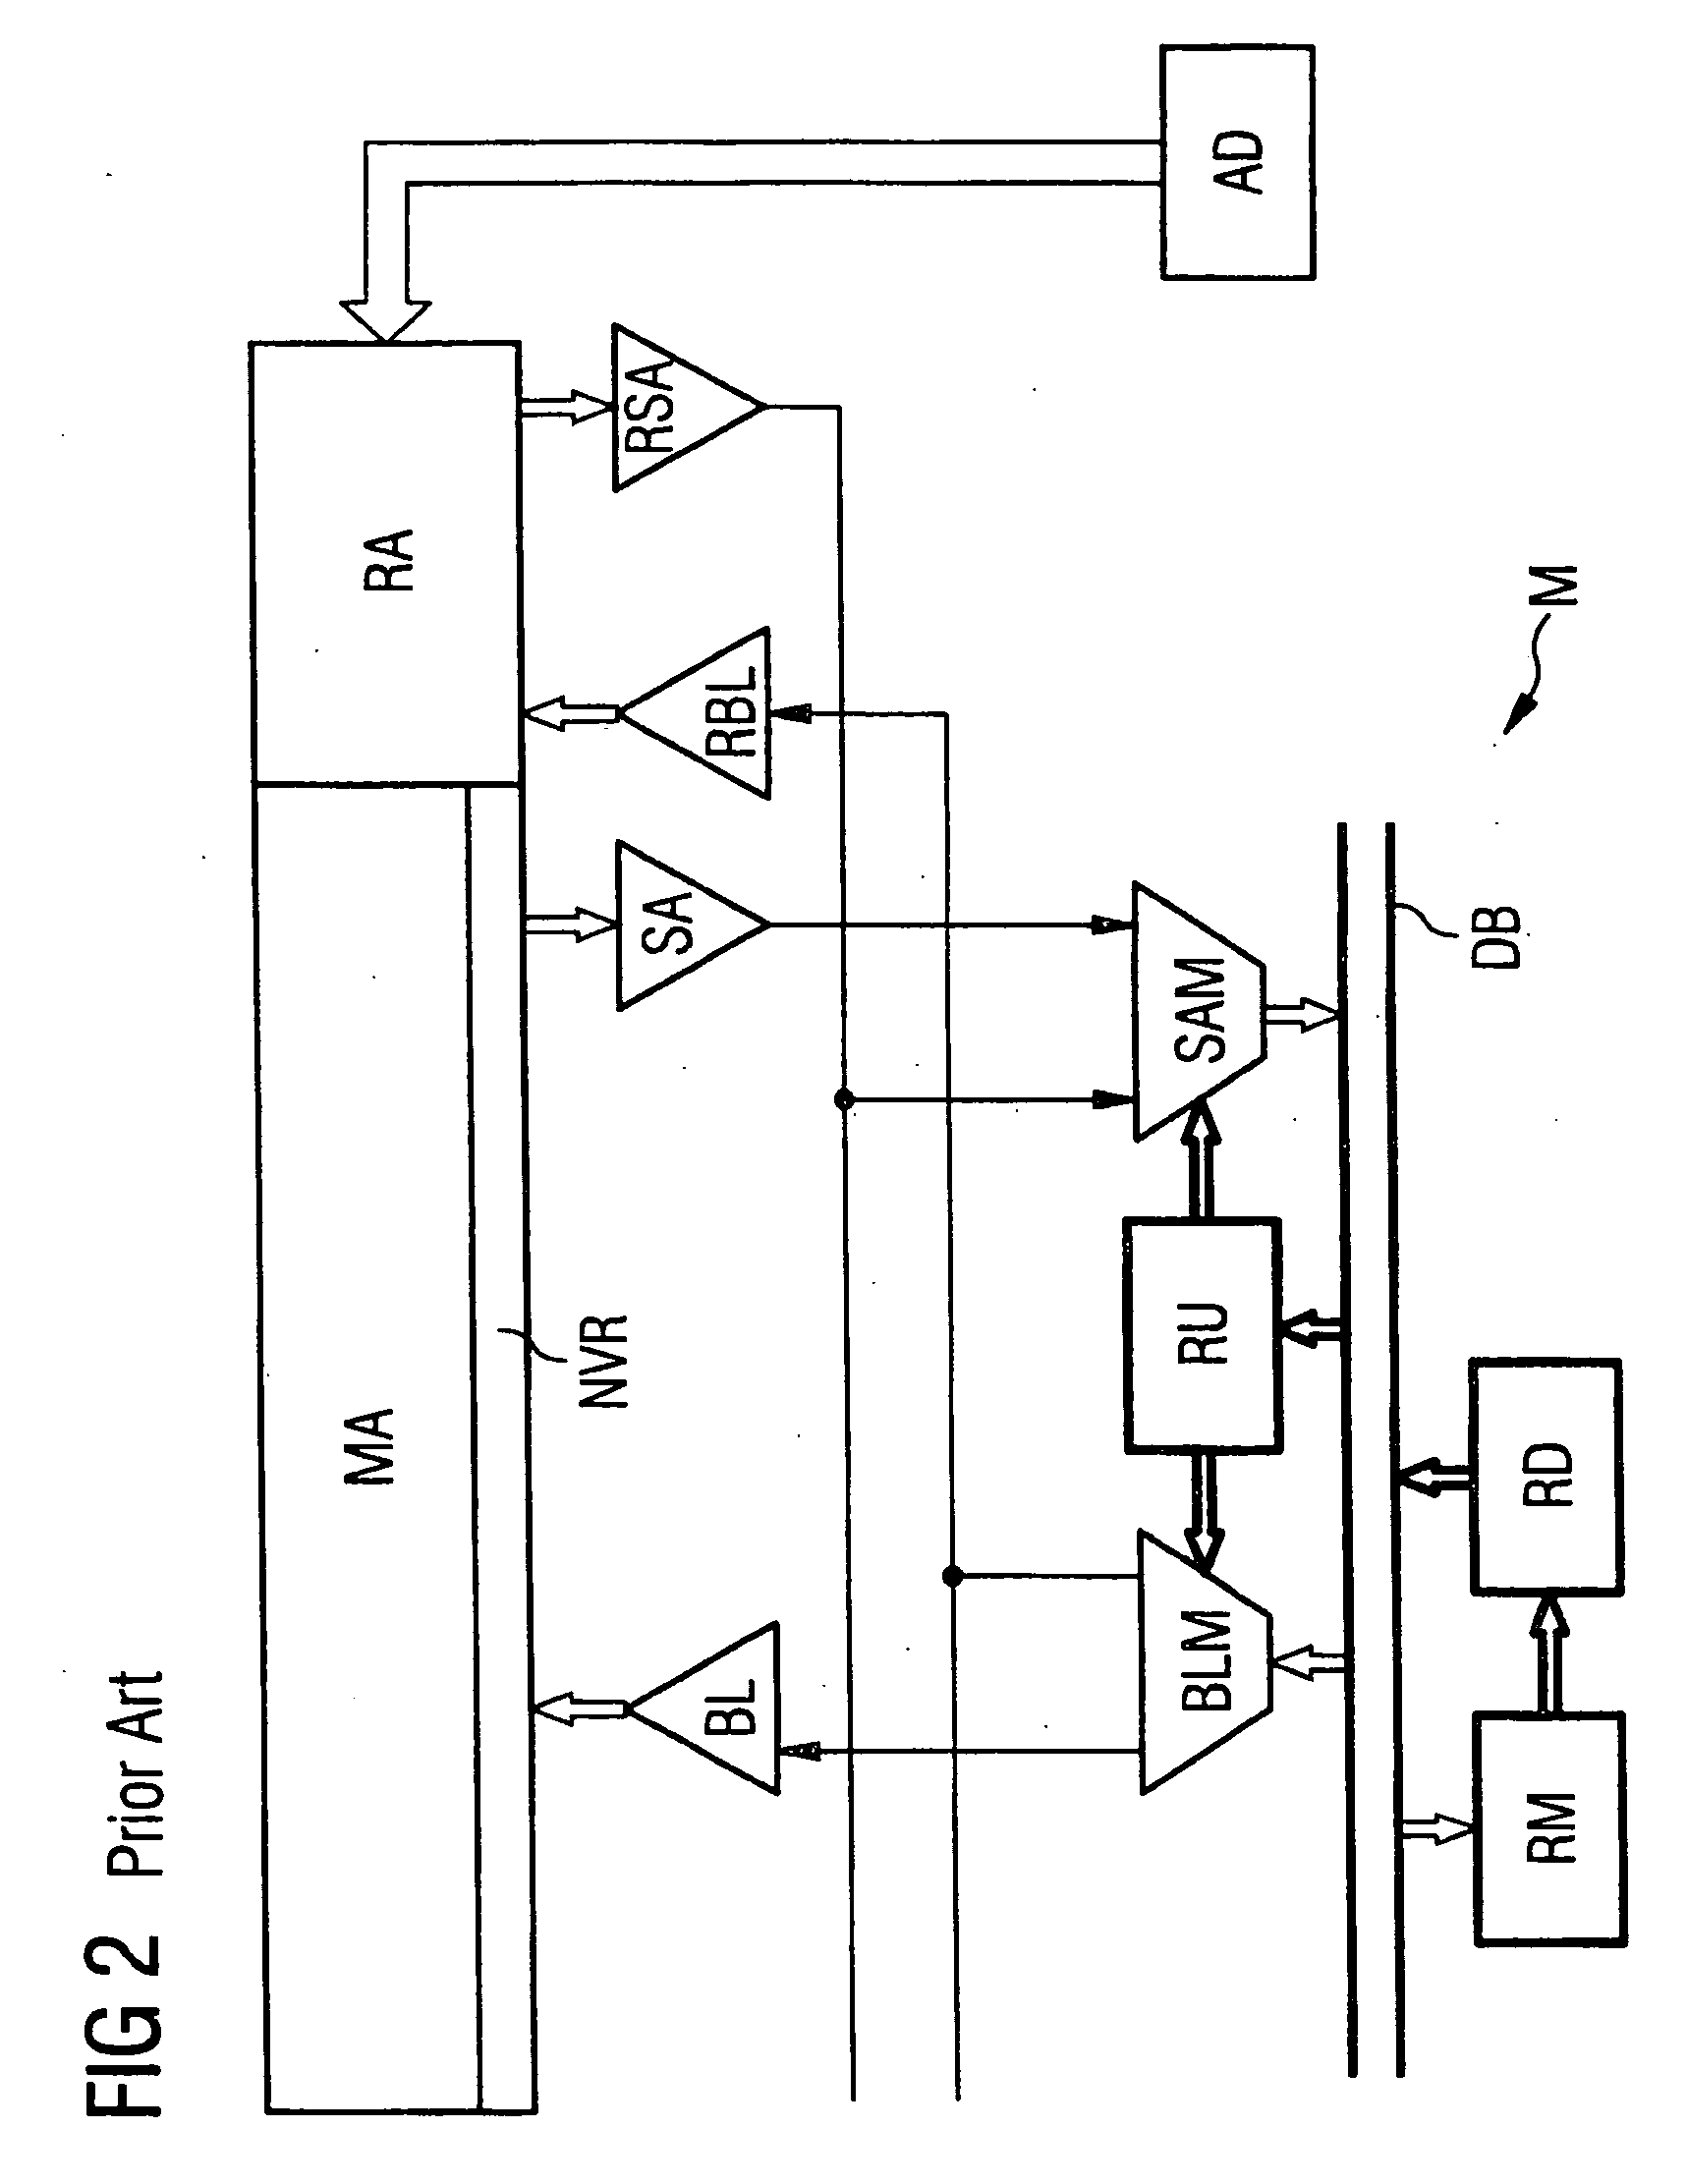 Semiconductor memory device and method for operating a semiconductor memory device